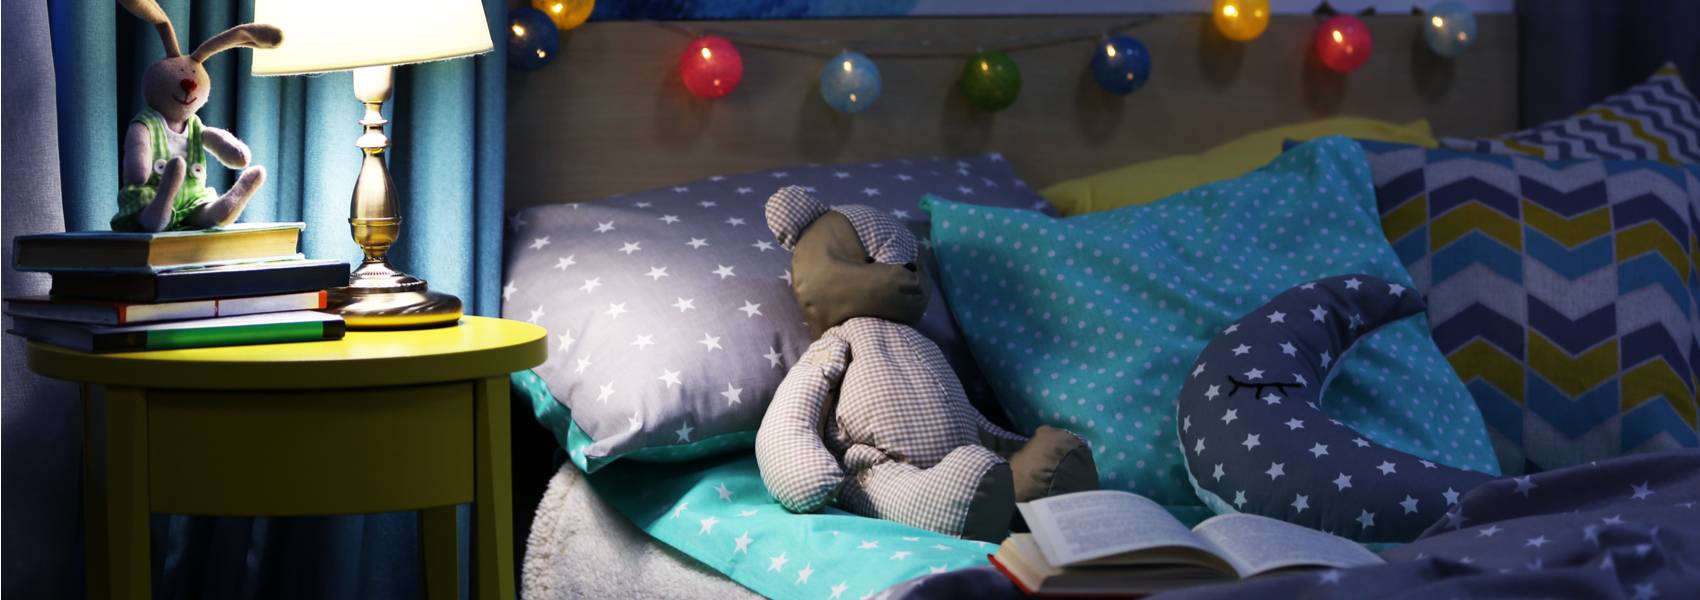 Child's bed with teddy bear